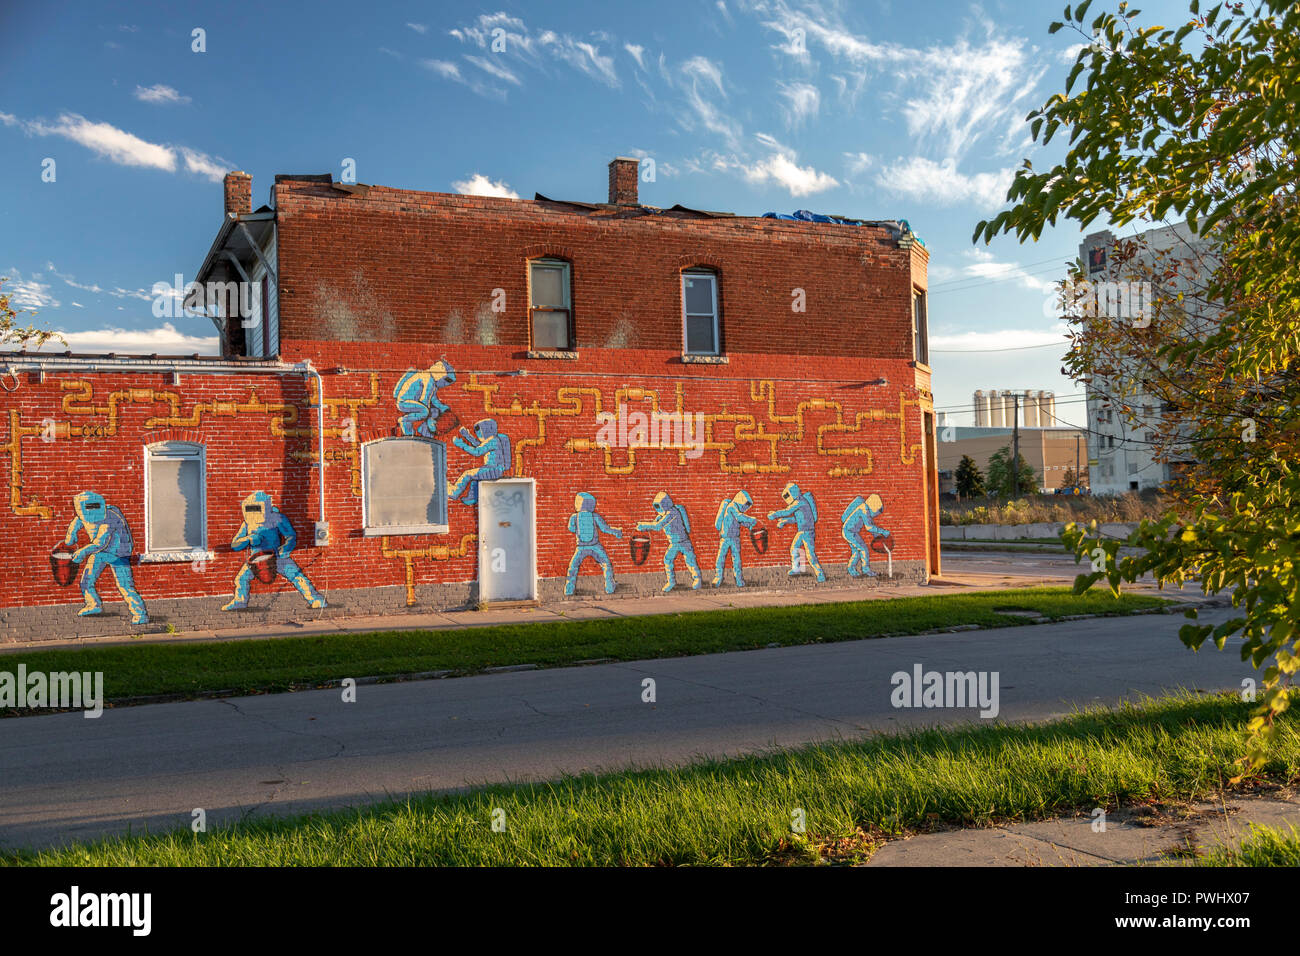 Detroit, Michigan - A painting on a building near the U.S. Ecology hazardous waste plant expresses neighborhood opposition to the facility. Stock Photo